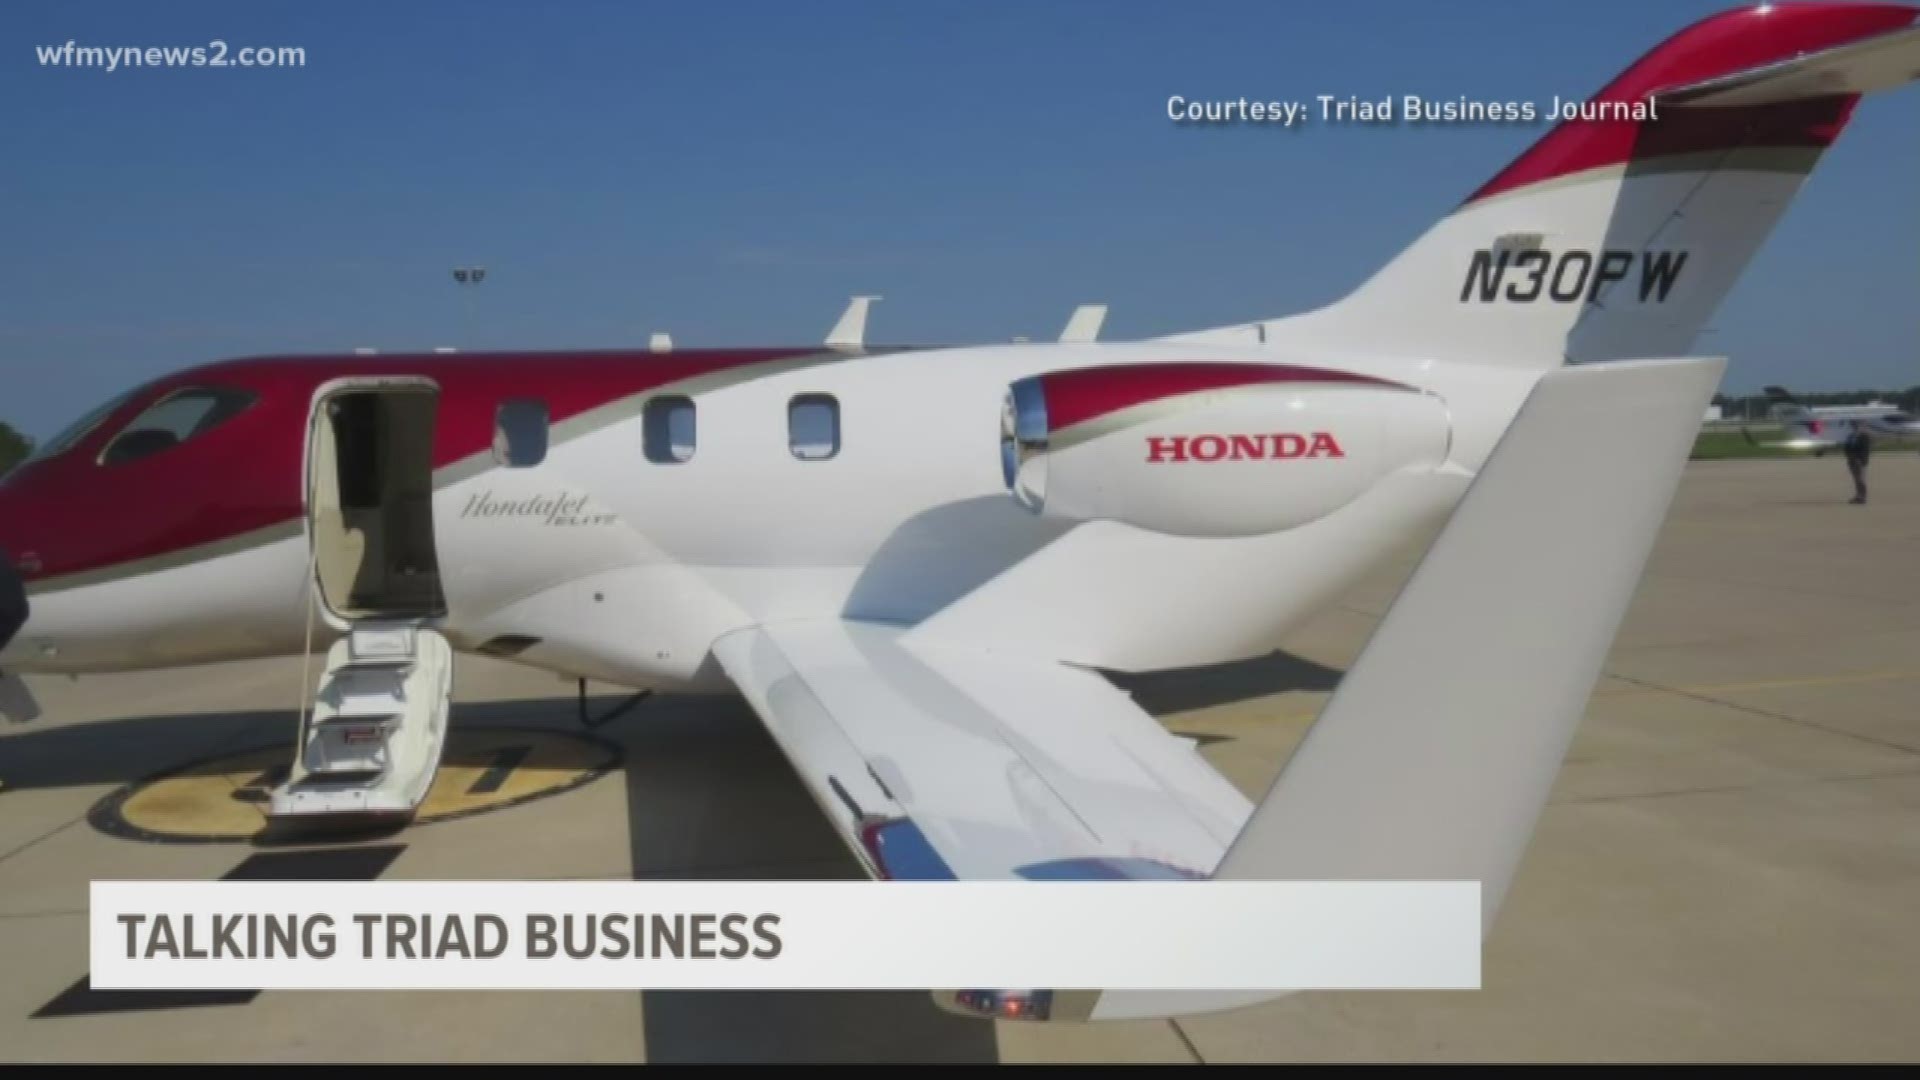 Triad Business Journal stops by to talk about the new state health plan, HondaJet getting ready to sell planes in a new country and a new smoothie shop coming to the Triad.